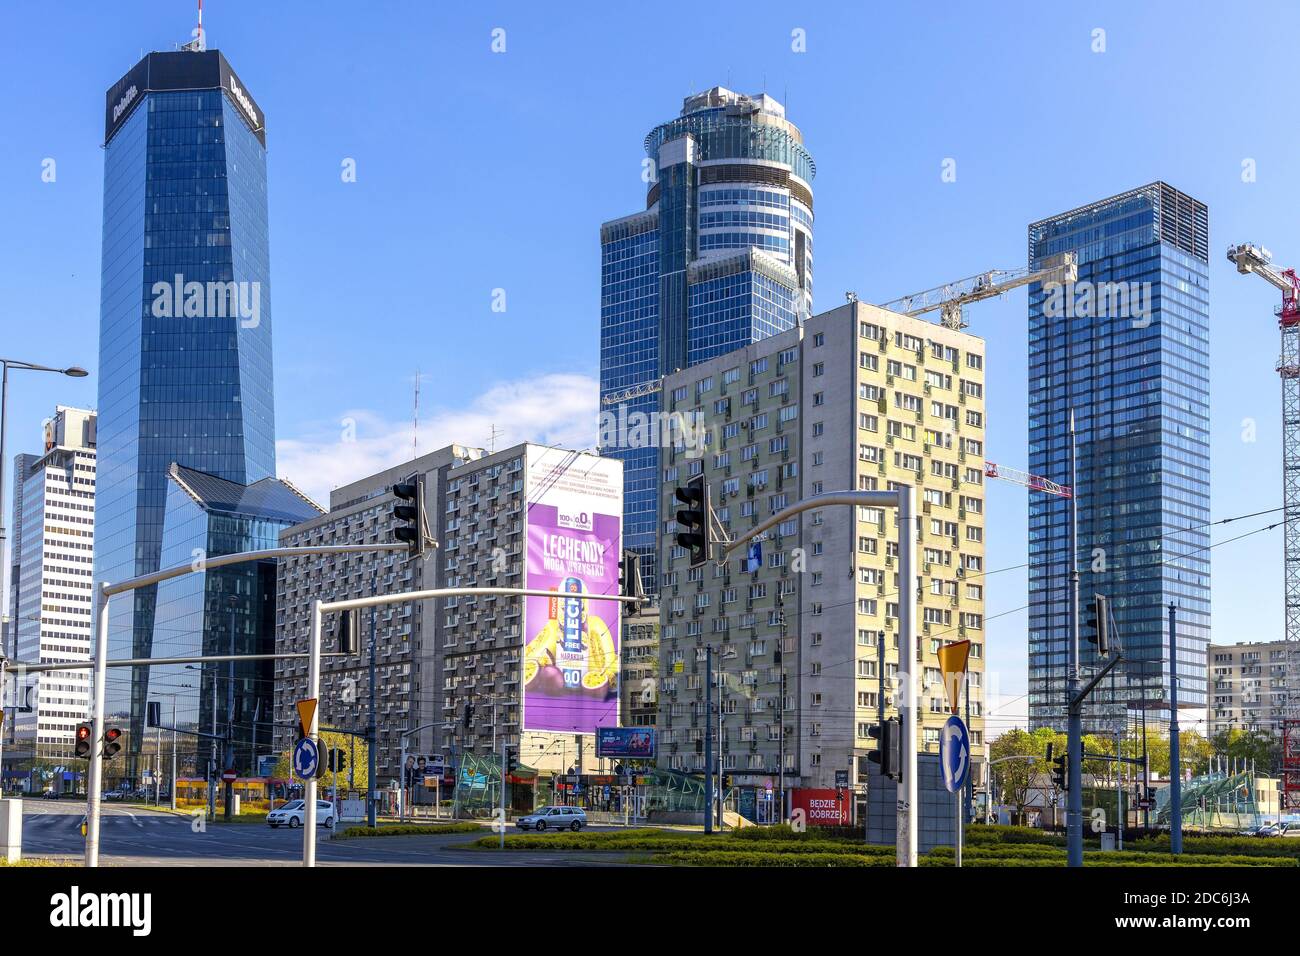 Warsaw, Mazovia / Poland - 2020/05/02: Panoramic view of Srodmiescie downtown district of Warsaw at Rondo ONZ roundabout with Q22, Cosmopolitan and Sp Stock Photo